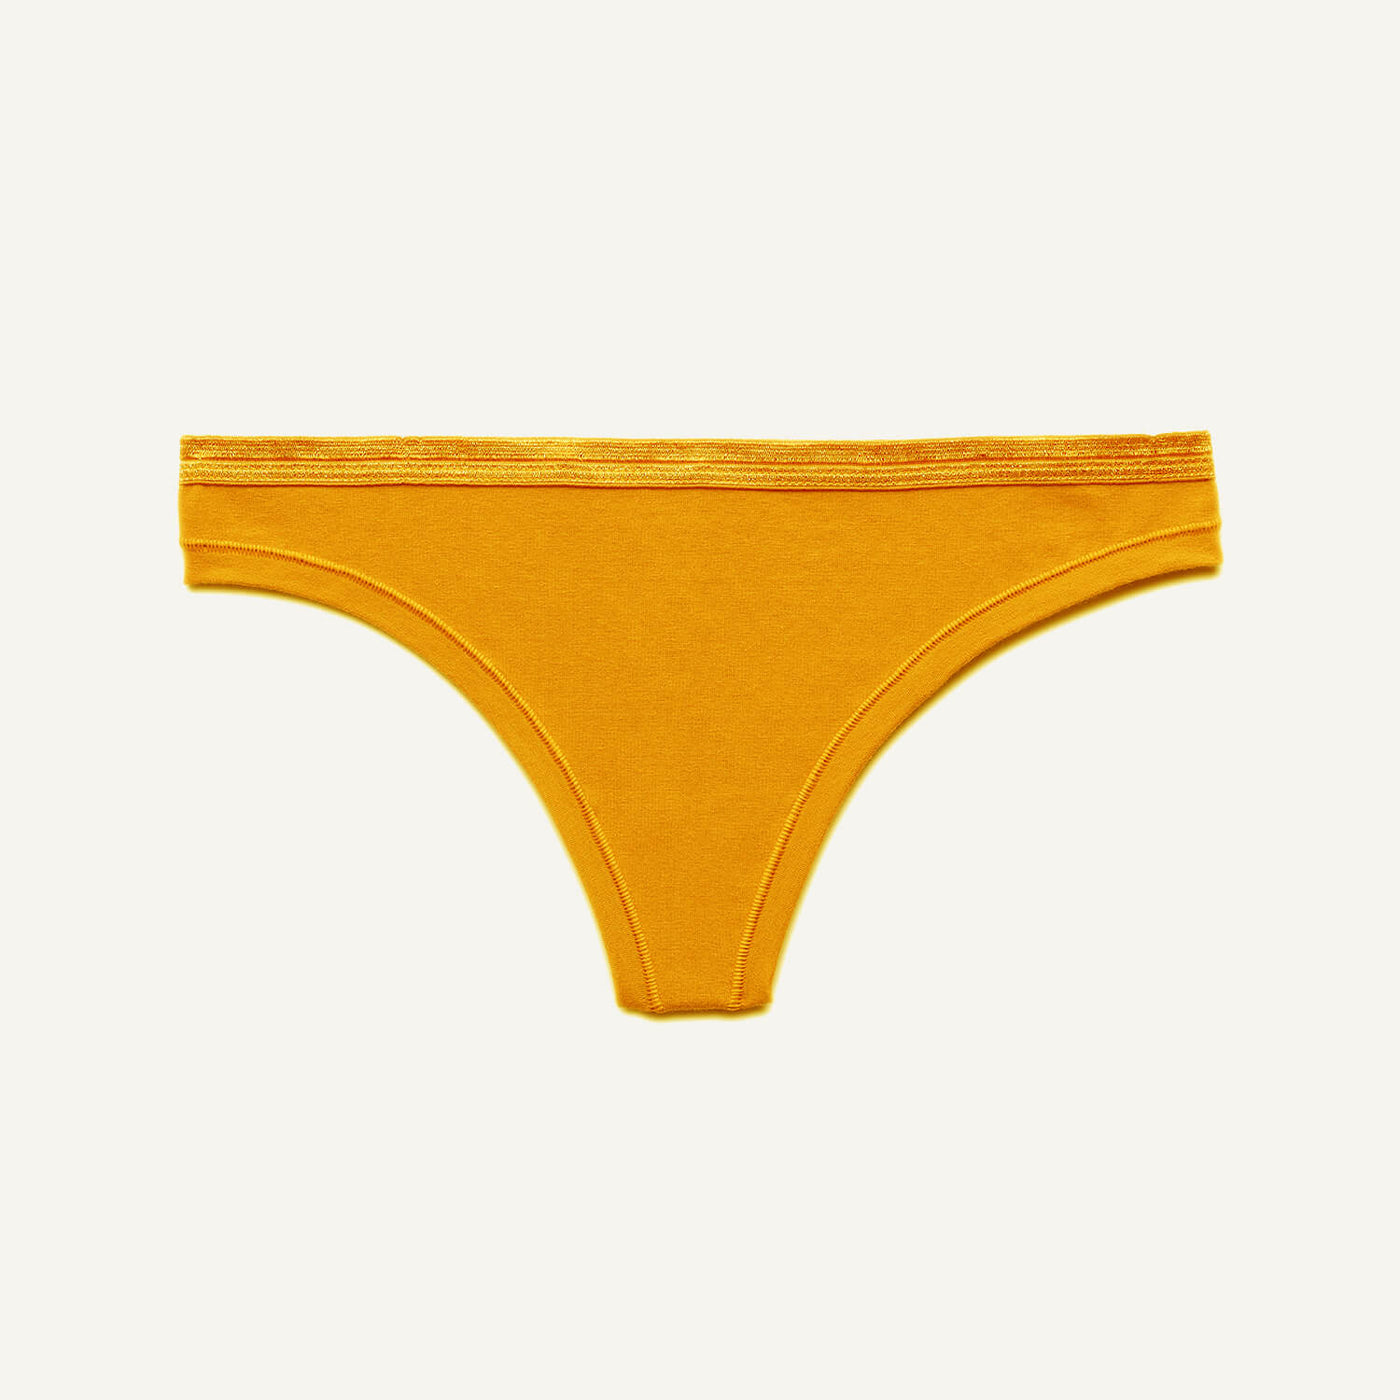 SALE Low-Rise Thong in Bumble